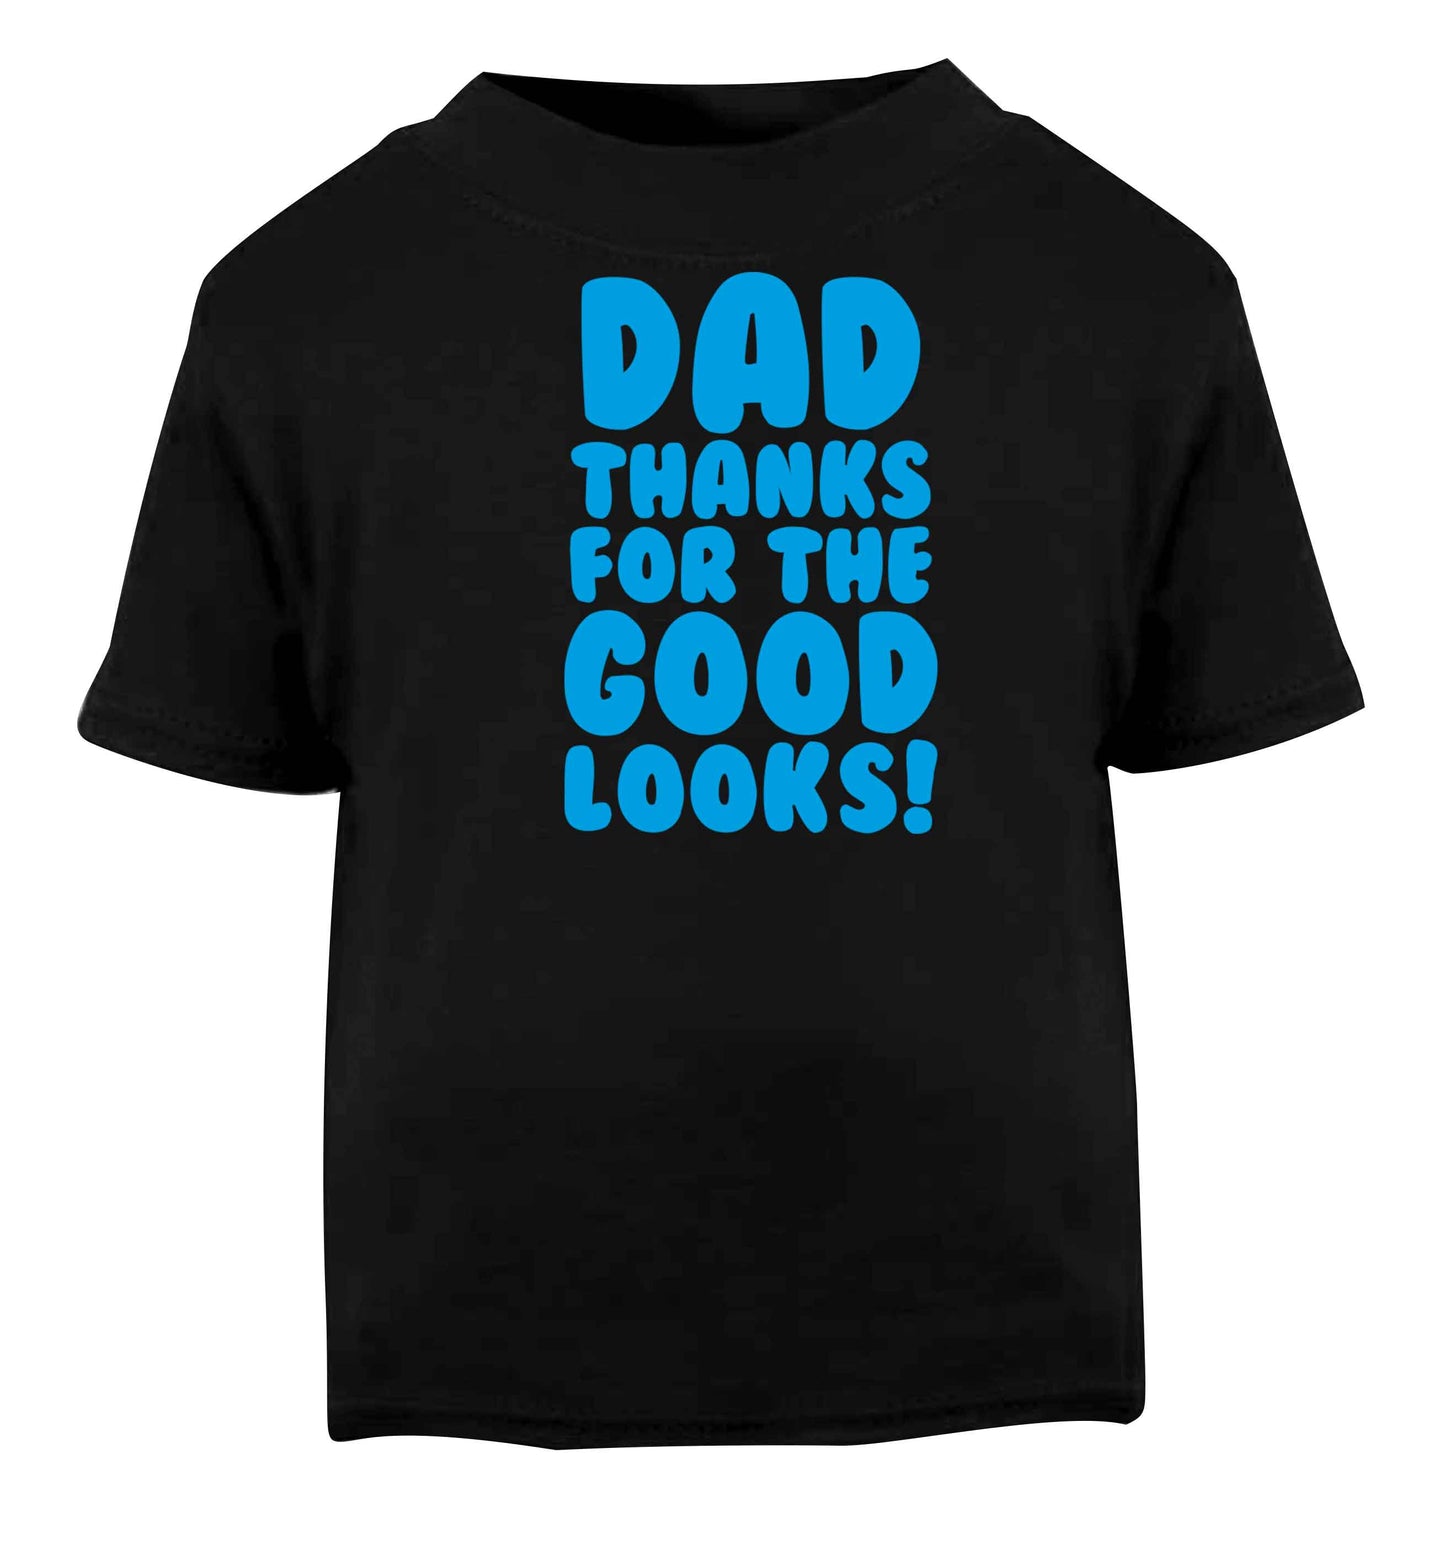 Dad thanks for the good looks Black baby toddler Tshirt 2 years